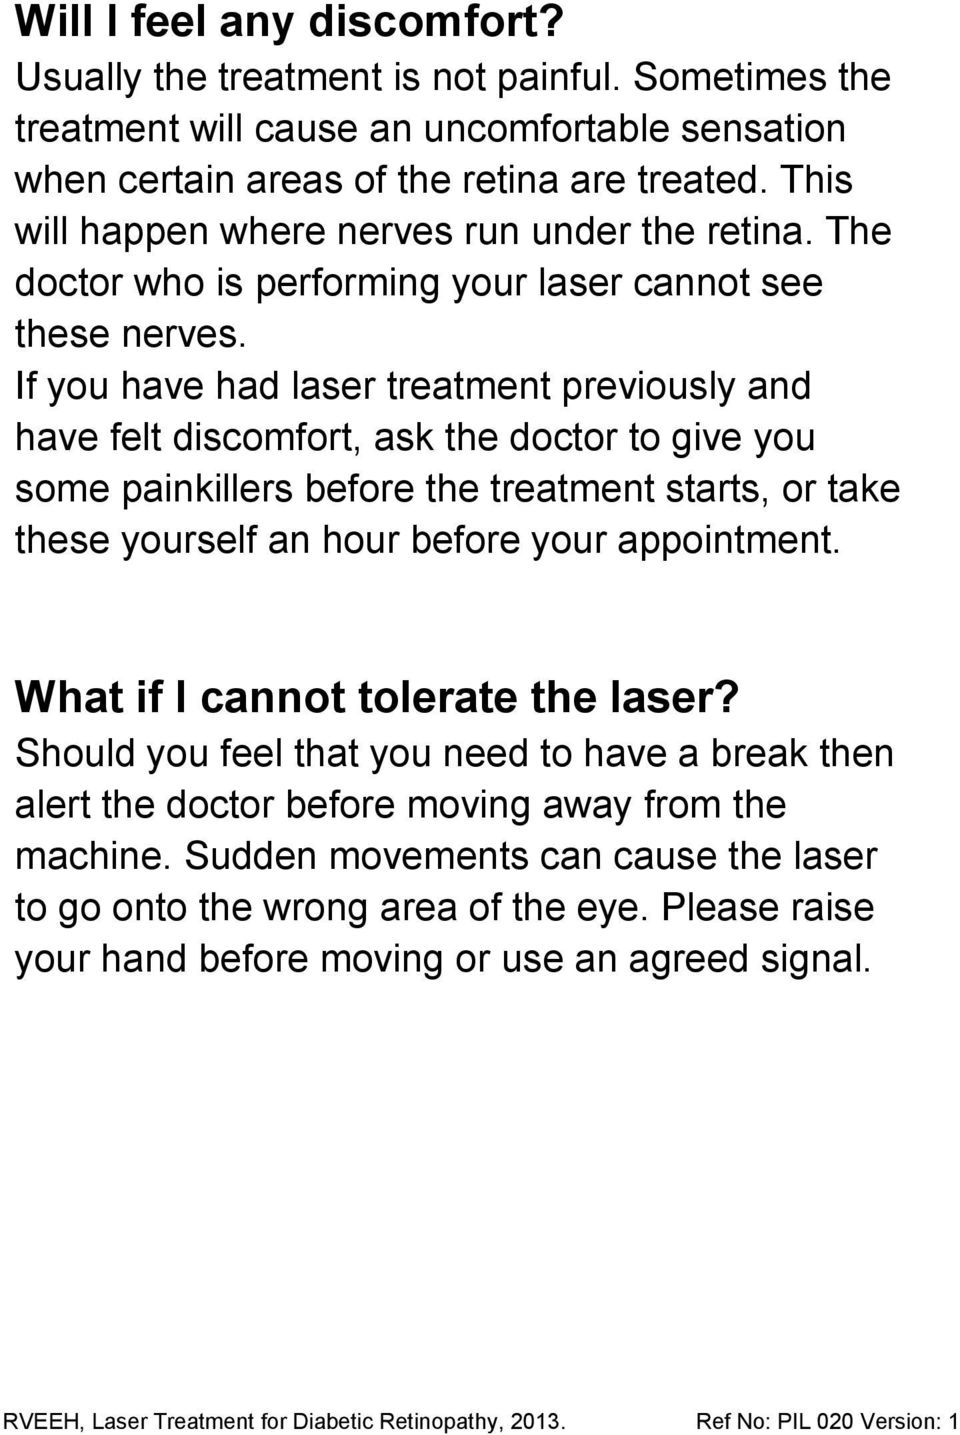 If you have had laser treatment previously and have felt discomfort, ask the doctor to give you some painkillers before the treatment starts, or take these yourself an hour before your